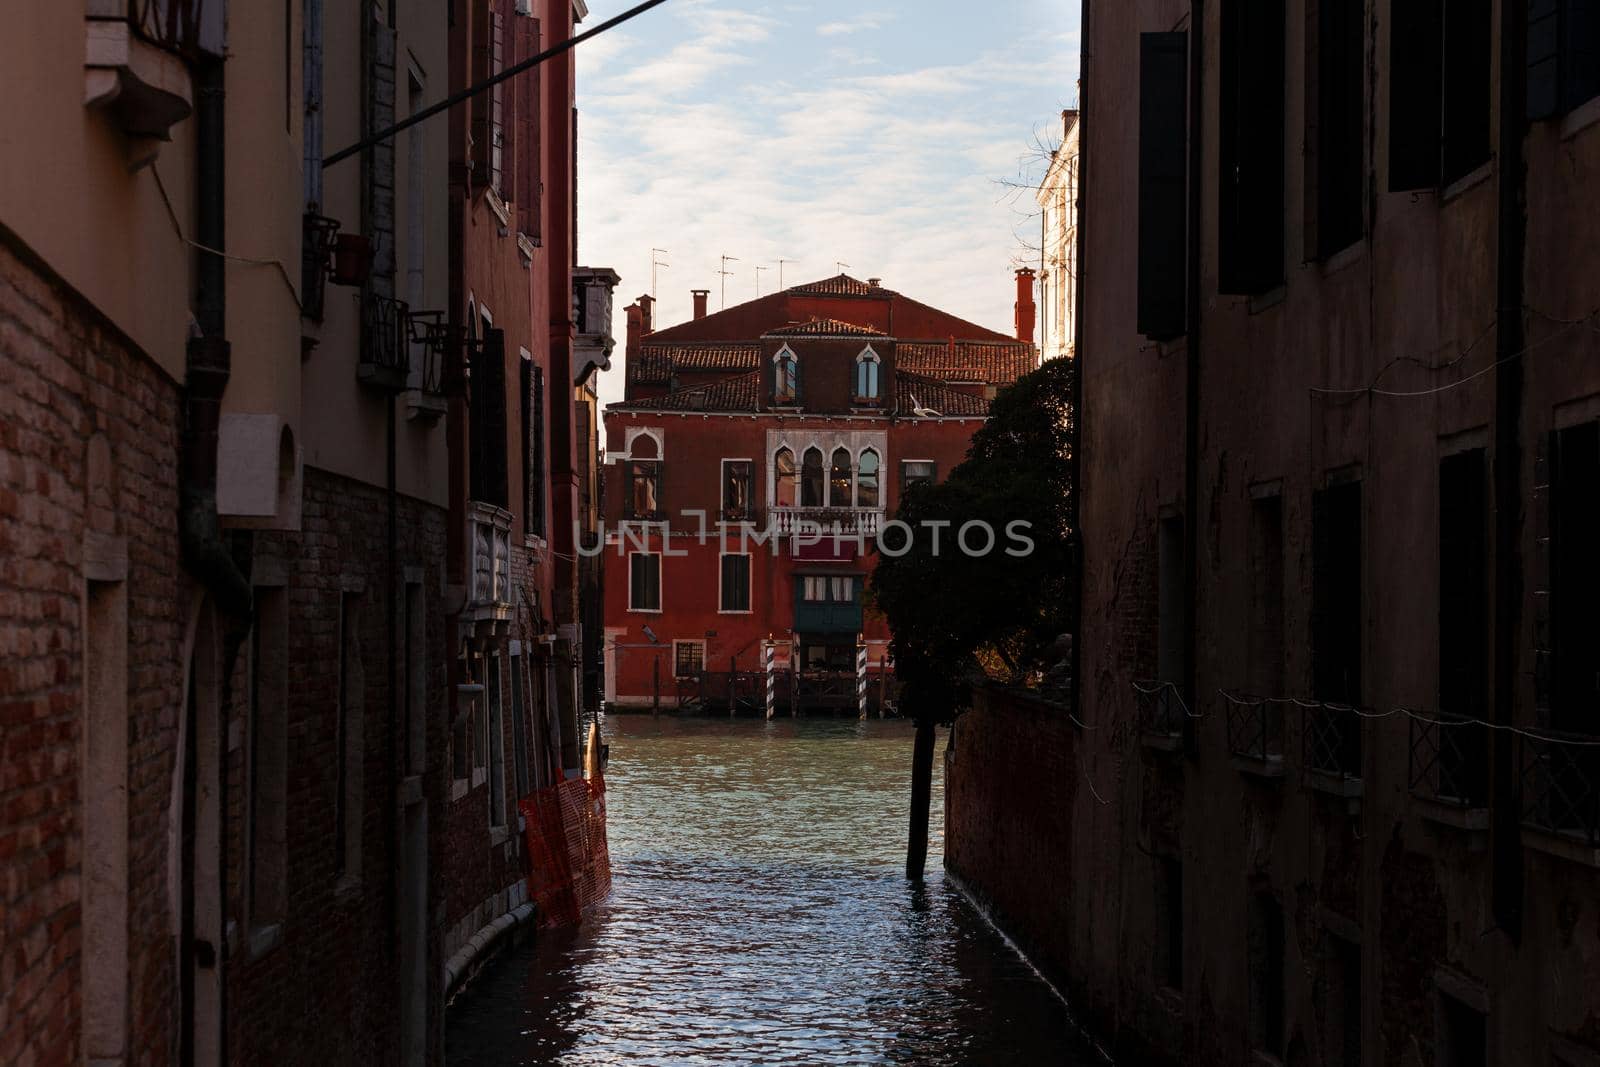 View of an historic building in Venice, Italy